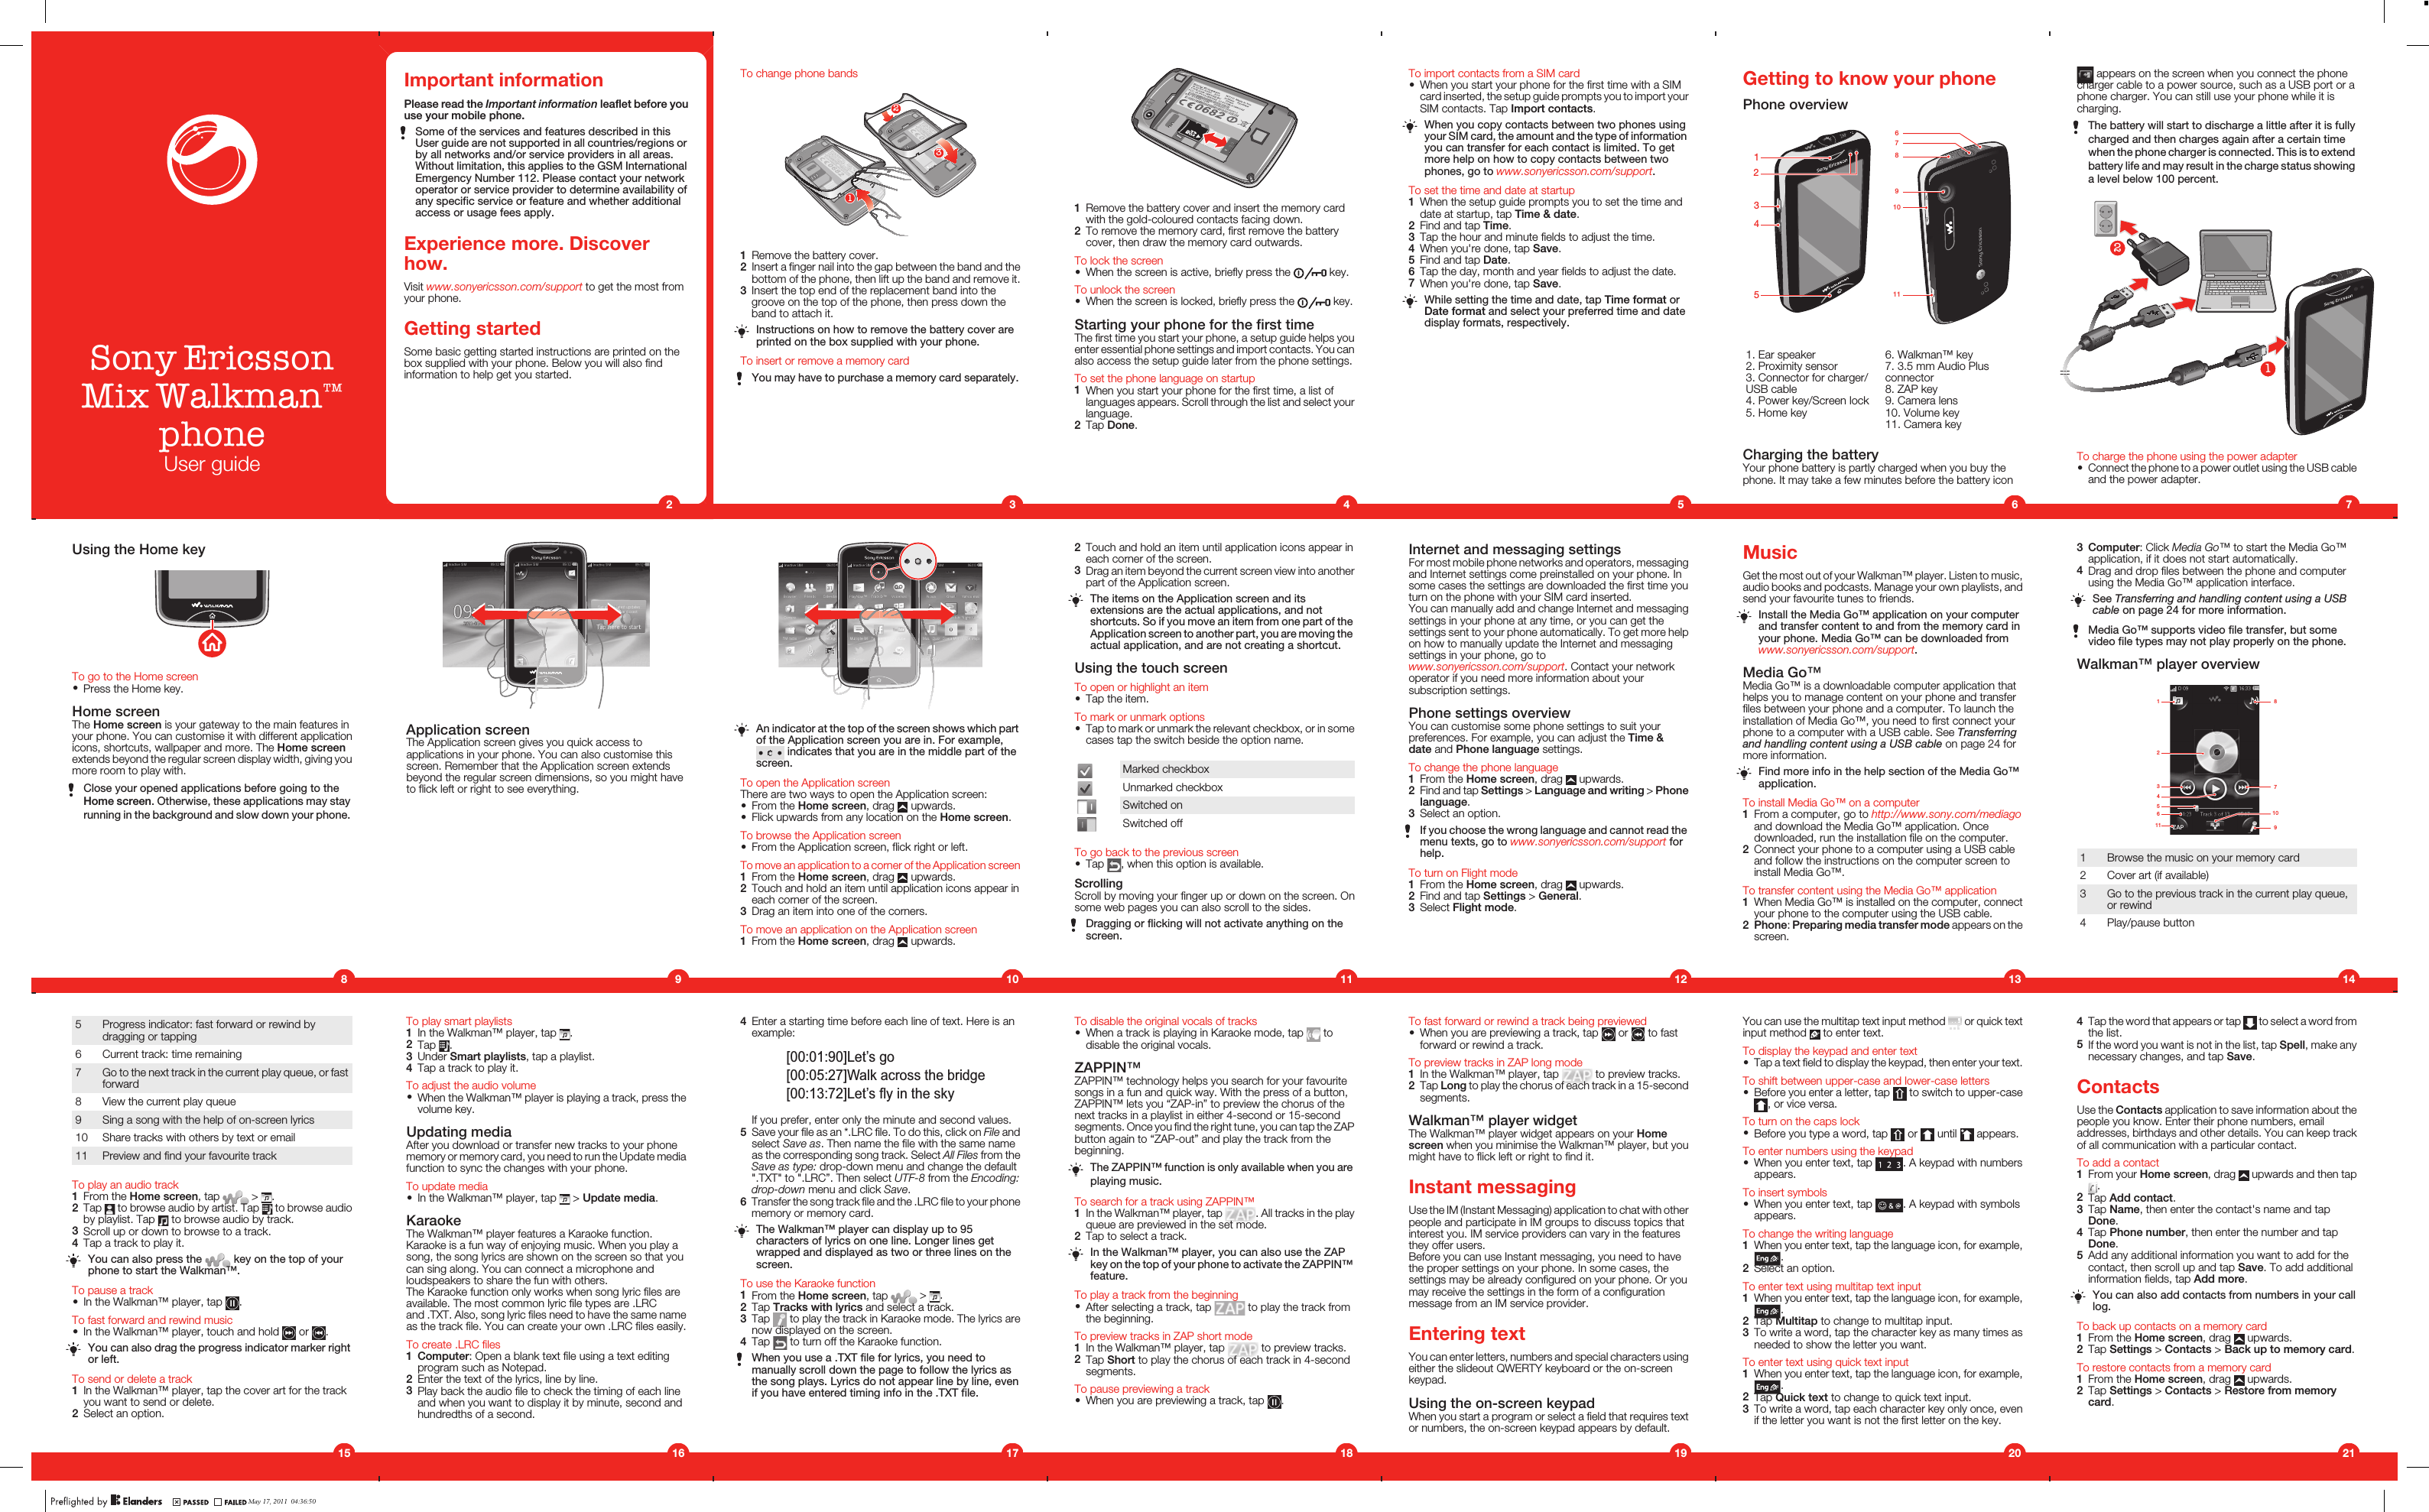 Sony Ericsson™phoneUser guideImportant informationPlease read the Important information leaflet before youuse your mobile phone.Some of the services and features described in thisUser guide are not supported in all countries/regions orby all networks and/or service providers in all areas.Without limitation, this applies to the GSM InternationalEmergency Number 112. Please contact your networkoperator or service provider to determine availability ofany specific service or feature and whether additionalaccess or usage fees apply.Experience more. Discoverhow.Visit www.sonyericsson.com/support to get the most fromyour phone.Getting startedSome basic getting started instructions are printed on thebox supplied with your phone. Below you will also findinformation to help get you started.2To change phone bands2131Remove the battery cover.2Insert a finger nail into the gap between the band and thebottom of the phone, then lift up the band and remove it.3Insert the top end of the replacement band into thegroove on the top of the phone, then press down theband to attach it.Instructions on how to remove the battery cover areprinted on the box supplied with your phone.To insert or remove a memory cardYou may have to purchase a memory card separately.31Remove the battery cover and insert the memory cardwith the gold-coloured contacts facing down.2To remove the memory card, first remove the batterycover, then draw the memory card outwards.To lock the screen•When the screen is active, briefly press the   key.To unlock the screen•When the screen is locked, briefly press the   key.Starting your phone for the first timeThe first time you start your phone, a setup guide helps youenter essential phone settings and import contacts. You canalso access the setup guide later from the phone settings.To set the phone language on startup1When you start your phone for the first time, a list oflanguages appears. Scroll through the list and select yourlanguage.2Tap Done.4To import contacts from a SIM card•When you start your phone for the first time with a SIMcard inserted, the setup guide prompts you to import yourSIM contacts. Tap Import contacts.When you copy contacts between two phones usingyour SIM card, the amount and the type of informationyou can transfer for each contact is limited. To getmore help on how to copy contacts between twophones, go to www.sonyericsson.com/support.To set the time and date at startup1When the setup guide prompts you to set the time anddate at startup, tap Time &amp; date.2Find and tap Time.3Tap the hour and minute fields to adjust the time.4When you&apos;re done, tap Save.5Find and tap Date.6Tap the day, month and year fields to adjust the date.7When you&apos;re done, tap Save.While setting the time and date, tap Time format orDate format and select your preferred time and datedisplay formats, respectively.5Getting to know your phonePhone overview1534297861011   1. Ear speaker2. Proximity sensor3. Connector for charger/USB cable4. Power key/Screen lock5. Home key6. Walkman™ key7. 3.5 mm Audio Plusconnector8. ZAP key9. Camera lens10. Volume key11. Camera keyCharging the batteryYour phone battery is partly charged when you buy thephone. It may take a few minutes before the battery icon6 appears on the screen when you connect the phonecharger cable to a power source, such as a USB port or aphone charger. You can still use your phone while it ischarging.The battery will start to discharge a little after it is fullycharged and then charges again after a certain timewhen the phone charger is connected. This is to extendbattery life and may result in the charge status showinga level below 100 percent.21To charge the phone using the power adapter•Connect the phone to a power outlet using the USB cableand the power adapter.73Computer: Click Media Go™ to start the Media Go™application, if it does not start automatically.4Drag and drop files between the phone and computerusing the Media Go™ application interface.See Transferring and handling content using a USBcable on page 24 for more information.Media Go™ supports video file transfer, but somevideo file types may not play properly on the phone.Walkman™ player overview1 8910375611421 Browse the music on your memory card2 Cover art (if available)3 Go to the previous track in the current play queue,or rewind4 Play/pause button14MusicGet the most out of your Walkman™ player. Listen to music,audio books and podcasts. Manage your own playlists, andsend your favourite tunes to friends.Install the Media Go™ application on your computerand transfer content to and from the memory card inyour phone. Media Go™ can be downloaded fromwww.sonyericsson.com/support.Media Go™Media Go™ is a downloadable computer application thathelps you to manage content on your phone and transferfiles between your phone and a computer. To launch theinstallation of Media Go™, you need to first connect yourphone to a computer with a USB cable. See Transferringand handling content using a USB cable on page 24 formore information.Find more info in the help section of the Media Go™application.To install Media Go™ on a computer1From a computer, go to http://www.sony.com/mediagoand download the Media Go™ application. Oncedownloaded, run the installation file on the computer.2Connect your phone to a computer using a USB cableand follow the instructions on the computer screen toinstall Media Go™.To transfer content using the Media Go™ application1When Media Go™ is installed on the computer, connectyour phone to the computer using the USB cable.2Phone: Preparing media transfer mode appears on thescreen.13Internet and messaging settingsFor most mobile phone networks and operators, messagingand Internet settings come preinstalled on your phone. Insome cases the settings are downloaded the first time youturn on the phone with your SIM card inserted.You can manually add and change Internet and messagingsettings in your phone at any time, or you can get thesettings sent to your phone automatically. To get more helpon how to manually update the Internet and messagingsettings in your phone, go towww.sonyericsson.com/support. Contact your networkoperator if you need more information about yoursubscription settings.Phone settings overviewYou can customise some phone settings to suit yourpreferences. For example, you can adjust the Time &amp;date and Phone language settings.To change the phone language1From the Home screen, drag   upwards.2Find and tap Settings &gt; Language and writing &gt; Phonelanguage.3Select an option.If you choose the wrong language and cannot read themenu texts, go to www.sonyericsson.com/support forhelp.To turn on Flight mode1From the Home screen, drag   upwards.2Find and tap Settings &gt; General.3Select Flight mode.122Touch and hold an item until application icons appear ineach corner of the screen.3Drag an item beyond the current screen view into anotherpart of the Application screen.The items on the Application screen and itsextensions are the actual applications, and notshortcuts. So if you move an item from one part of theApplication screen to another part, you are moving theactual application, and are not creating a shortcut.Using the touch screenTo open or highlight an item•Tap the item.To mark or unmark options•Tap to mark or unmark the relevant checkbox, or in somecases tap the switch beside the option name.Marked checkboxUnmarked checkboxSwitched onSwitched offTo go back to the previous screen•Tap  , when this option is available.ScrollingScroll by moving your finger up or down on the screen. Onsome web pages you can also scroll to the sides.Dragging or flicking will not activate anything on thescreen.11Application screenThe Application screen gives you quick access toapplications in your phone. You can also customise thisscreen. Remember that the Application screen extendsbeyond the regular screen dimensions, so you might haveto flick left or right to see everything.9Using the Home keyTo go to the Home screen•Press the Home key.Home screenThe Home screen is your gateway to the main features inyour phone. You can customise it with different applicationicons, shortcuts, wallpaper and more. The Home screenextends beyond the regular screen display width, giving youmore room to play with.Close your opened applications before going to theHome screen. Otherwise, these applications may stayrunning in the background and slow down your phone.8An indicator at the top of the screen shows which partof the Application screen you are in. For example, indicates that you are in the middle part of thescreen.To open the Application screenThere are two ways to open the Application screen:•From the Home screen, drag   upwards.•Flick upwards from any location on the Home screen.To browse the Application screen•From the Application screen, flick right or left.To move an application to a corner of the Application screen1From the Home screen, drag   upwards.2Touch and hold an item until application icons appear ineach corner of the screen.3Drag an item into one of the corners.To move an application on the Application screen1From the Home screen, drag   upwards.105 Progress indicator: fast forward or rewind bydragging or tapping6 Current track: time remaining7Go to the next track in the current play queue, or fastforward8 View the current play queue9 Sing a song with the help of on-screen lyrics10 Share tracks with others by text or email11 Preview and find your favourite trackTo play an audio track1From the Home screen, tap   &gt;  .2Tap   to browse audio by artist. Tap   to browse audioby playlist. Tap   to browse audio by track.3Scroll up or down to browse to a track.4Tap a track to play it.You can also press the   key on the top of yourphone to start the Walkman™.To pause a track•In the Walkman™ player, tap  .To fast forward and rewind music•In the Walkman™ player, touch and hold   or  .You can also drag the progress indicator marker rightor left.To send or delete a track1In the Walkman™ player, tap the cover art for the trackyou want to send or delete.2Select an option.15To play smart playlists1In the Walkman™ player, tap  .2Tap  .3Under Smart playlists, tap a playlist.4Tap a track to play it.To adjust the audio volume•When the Walkman™ player is playing a track, press thevolume key.Updating mediaAfter you download or transfer new tracks to your phonememory or memory card, you need to run the Update mediafunction to sync the changes with your phone.To update media•In the Walkman™ player, tap   &gt; Update media.KaraokeThe Walkman™ player features a Karaoke function.Karaoke is a fun way of enjoying music. When you play asong, the song lyrics are shown on the screen so that youcan sing along. You can connect a microphone andloudspeakers to share the fun with others.The Karaoke function only works when song lyric files areavailable. The most common lyric file types are .LRCand .TXT. Also, song lyric files need to have the same nameas the track file. You can create your own .LRC files easily.To create .LRC files1Computer: Open a blank text file using a text editingprogram such as Notepad.2Enter the text of the lyrics, line by line.3Play back the audio file to check the timing of each lineand when you want to display it by minute, second andhundredths of a second.164Enter a starting time before each line of text. Here is anexample:If you prefer, enter only the minute and second values.5Save your file as an *.LRC file. To do this, click on File andselect Save as. Then name the file with the same nameas the corresponding song track. Select All Files from theSave as type: drop-down menu and change the default&quot;.TXT&quot; to &quot;.LRC”. Then select UTF-8 from the Encoding:drop-down menu and click Save.6Transfer the song track file and the .LRC file to your phonememory or memory card.The Walkman™ player can display up to 95characters of lyrics on one line. Longer lines getwrapped and displayed as two or three lines on thescreen.To use the Karaoke function1From the Home screen, tap   &gt;  .2Tap Tracks with lyrics and select a track.3Tap   to play the track in Karaoke mode. The lyrics arenow displayed on the screen.4Tap   to turn off the Karaoke function.When you use a .TXT file for lyrics, you need tomanually scroll down the page to follow the lyrics asthe song plays. Lyrics do not appear line by line, evenif you have entered timing info in the .TXT file.17To disable the original vocals of tracks•When a track is playing in Karaoke mode, tap   todisable the original vocals.ZAPPIN™ZAPPIN™ technology helps you search for your favouritesongs in a fun and quick way. With the press of a button,ZAPPIN™ lets you “ZAP-in” to preview the chorus of thenext tracks in a playlist in either 4-second or 15-secondsegments. Once you find the right tune, you can tap the ZAPbutton again to “ZAP-out” and play the track from thebeginning.The ZAPPIN™ function is only available when you areplaying music.To search for a track using ZAPPIN™1In the Walkman™ player, tap  . All tracks in the playqueue are previewed in the set mode.2Tap to select a track.In the Walkman™ player, you can also use the ZAPkey on the top of your phone to activate the ZAPPIN™feature.To play a track from the beginning•After selecting a track, tap   to play the track fromthe beginning.To preview tracks in ZAP short mode1In the Walkman™ player, tap   to preview tracks.2Tap Short to play the chorus of each track in 4-secondsegments.To pause previewing a track•When you are previewing a track, tap  .18To fast forward or rewind a track being previewed•When you are previewing a track, tap   or   to fastforward or rewind a track.To preview tracks in ZAP long mode1In the Walkman™ player, tap   to preview tracks.2Tap Long to play the chorus of each track in a 15-secondsegments.Walkman™ player widgetThe Walkman™ player widget appears on your Homescreen when you minimise the Walkman™ player, but youmight have to flick left or right to find it.Instant messagingUse the IM (Instant Messaging) application to chat with otherpeople and participate in IM groups to discuss topics thatinterest you. IM service providers can vary in the featuresthey offer users.Before you can use Instant messaging, you need to havethe proper settings on your phone. In some cases, thesettings may be already configured on your phone. Or youmay receive the settings in the form of a configurationmessage from an IM service provider.Entering textYou can enter letters, numbers and special characters usingeither the slideout QWERTY keyboard or the on-screenkeypad.Using the on-screen keypadWhen you start a program or select a field that requires textor numbers, the on-screen keypad appears by default.19You can use the multitap text input method   or quick textinput method   to enter text.To display the keypad and enter text•Tap a text field to display the keypad, then enter your text.To shift between upper-case and lower-case letters•Before you enter a letter, tap   to switch to upper-case, or vice versa.To turn on the caps lock•Before you type a word, tap   or   until   appears.To enter numbers using the keypad•When you enter text, tap  . A keypad with numbersappears.To insert symbols•When you enter text, tap  . A keypad with symbolsappears.To change the writing language1When you enter text, tap the language icon, for example,.2Select an option.To enter text using multitap text input1When you enter text, tap the language icon, for example,.2Tap Multitap to change to multitap input.3To write a word, tap the character key as many times asneeded to show the letter you want.To enter text using quick text input1When you enter text, tap the language icon, for example,.2Tap Quick text to change to quick text input.3To write a word, tap each character key only once, evenif the letter you want is not the first letter on the key.204Tap the word that appears or tap   to select a word fromthe list.5If the word you want is not in the list, tap Spell, make anynecessary changes, and tap Save.ContactsUse the Contacts application to save information about thepeople you know. Enter their phone numbers, emailaddresses, birthdays and other details. You can keep trackof all communication with a particular contact.To add a contact1From your Home screen, drag   upwards and then tap.2Tap Add contact.3Tap Name, then enter the contact&apos;s name and tapDone.4Tap Phone number, then enter the number and tapDone.5Add any additional information you want to add for thecontact, then scroll up and tap Save. To add additionalinformation fields, tap Add more.You can also add contacts from numbers in your calllog.To back up contacts on a memory card1From the Home screen, drag   upwards.2Tap Settings &gt; Contacts &gt; Back up to memory card.To restore contacts from a memory card1From the Home screen, drag   upwards.2Tap Settings &gt; Contacts &gt; Restore from memorycard.21May 17, 2011  04:36:50[00:01:90]Let’s go[00:05:27]Walk across the bridge[00:13:72]Let’s fly in the skyMix Walkman